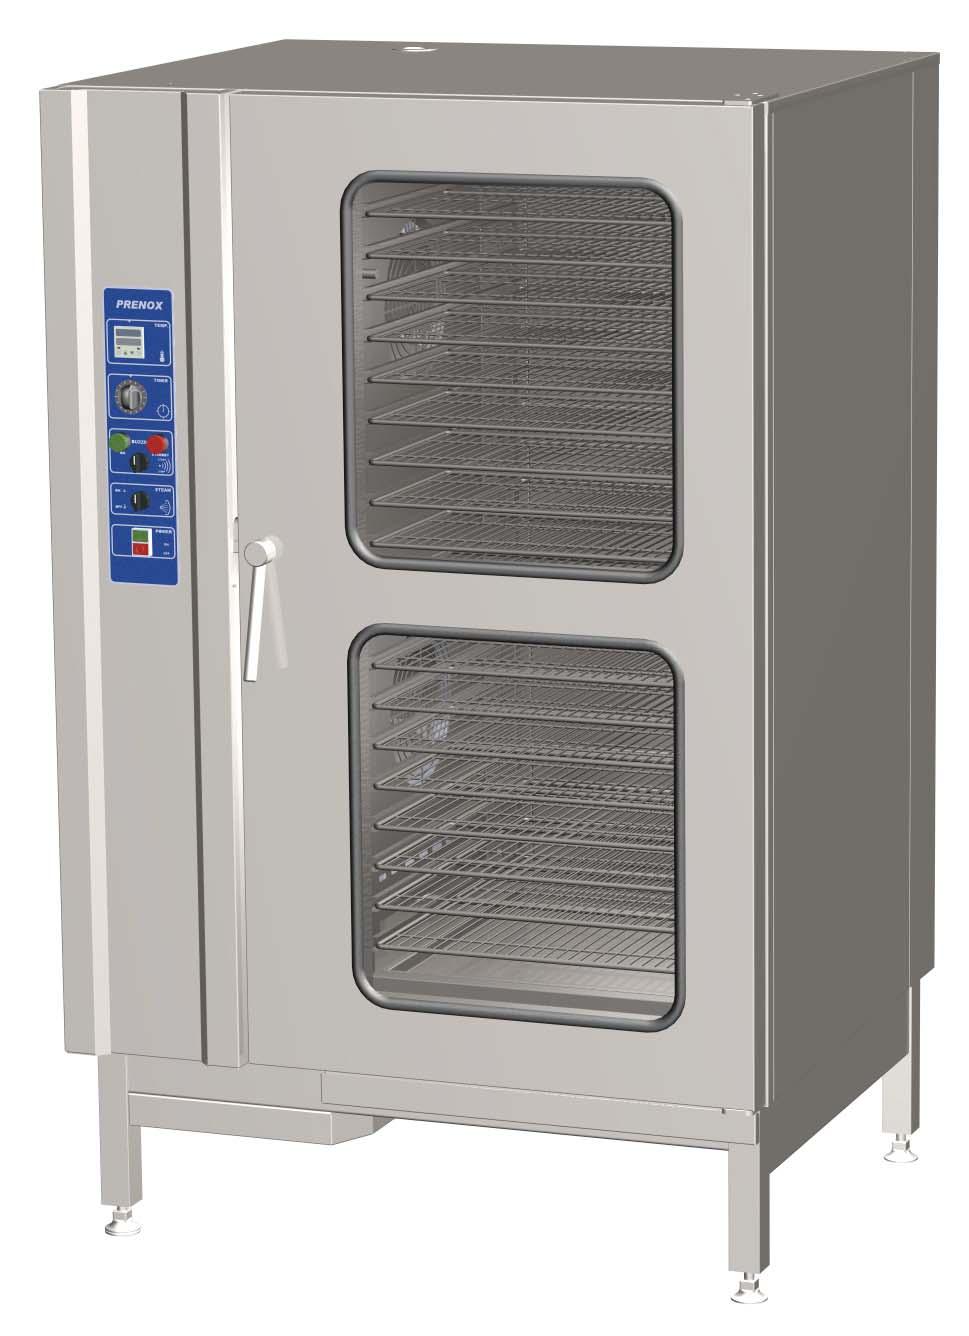 Prenox Convection Oven 40 Pan Vertical OVENS Designed with rounded corners and a drainage system to facilitate easy cleaning.